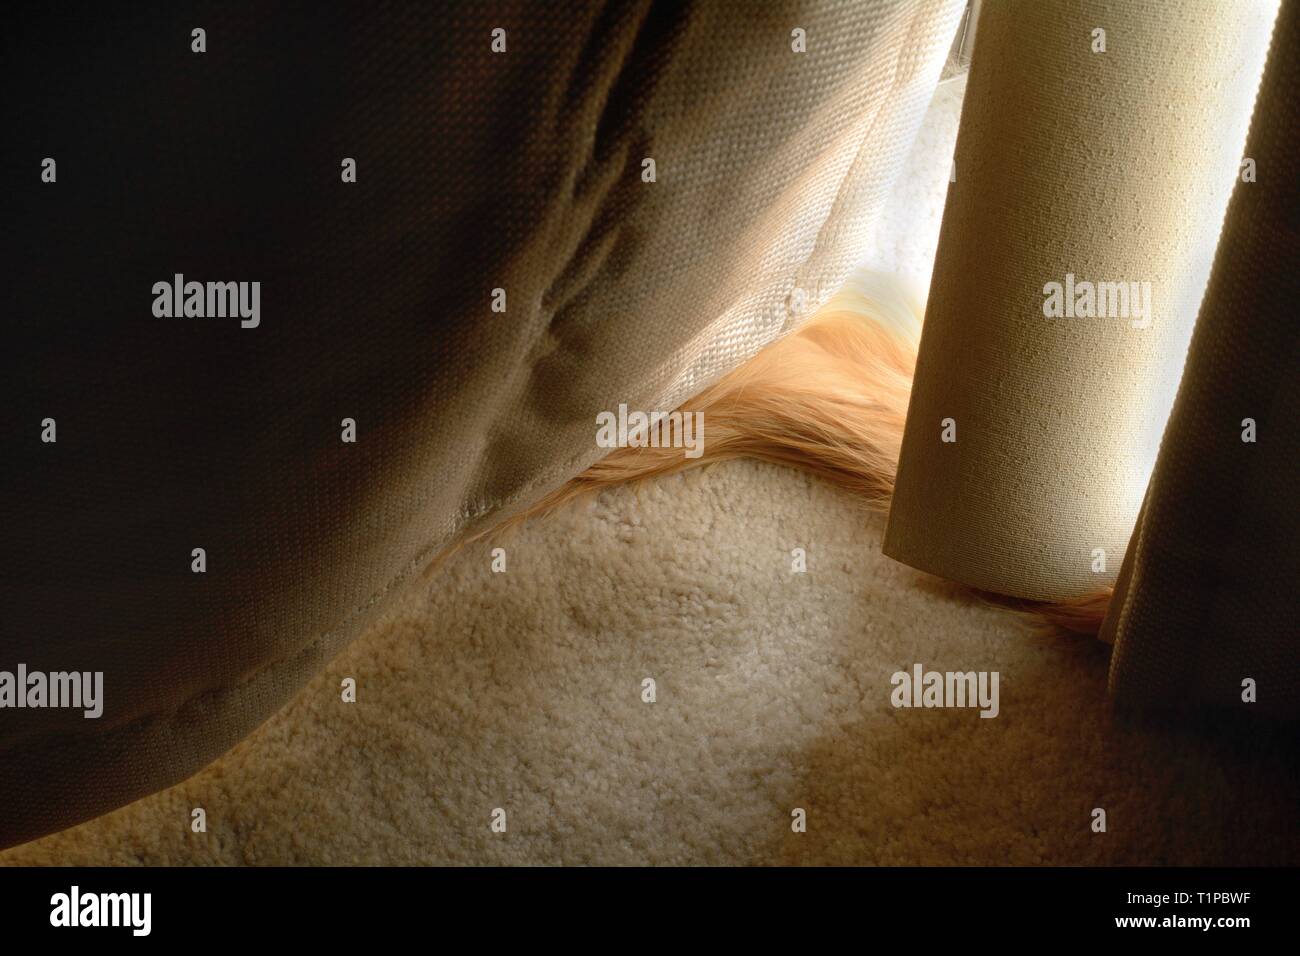 Symbol or concept of pet end of life with only cat tail showing behind shadowed curtains and blinds in front of light filled glass window or door Stock Photo